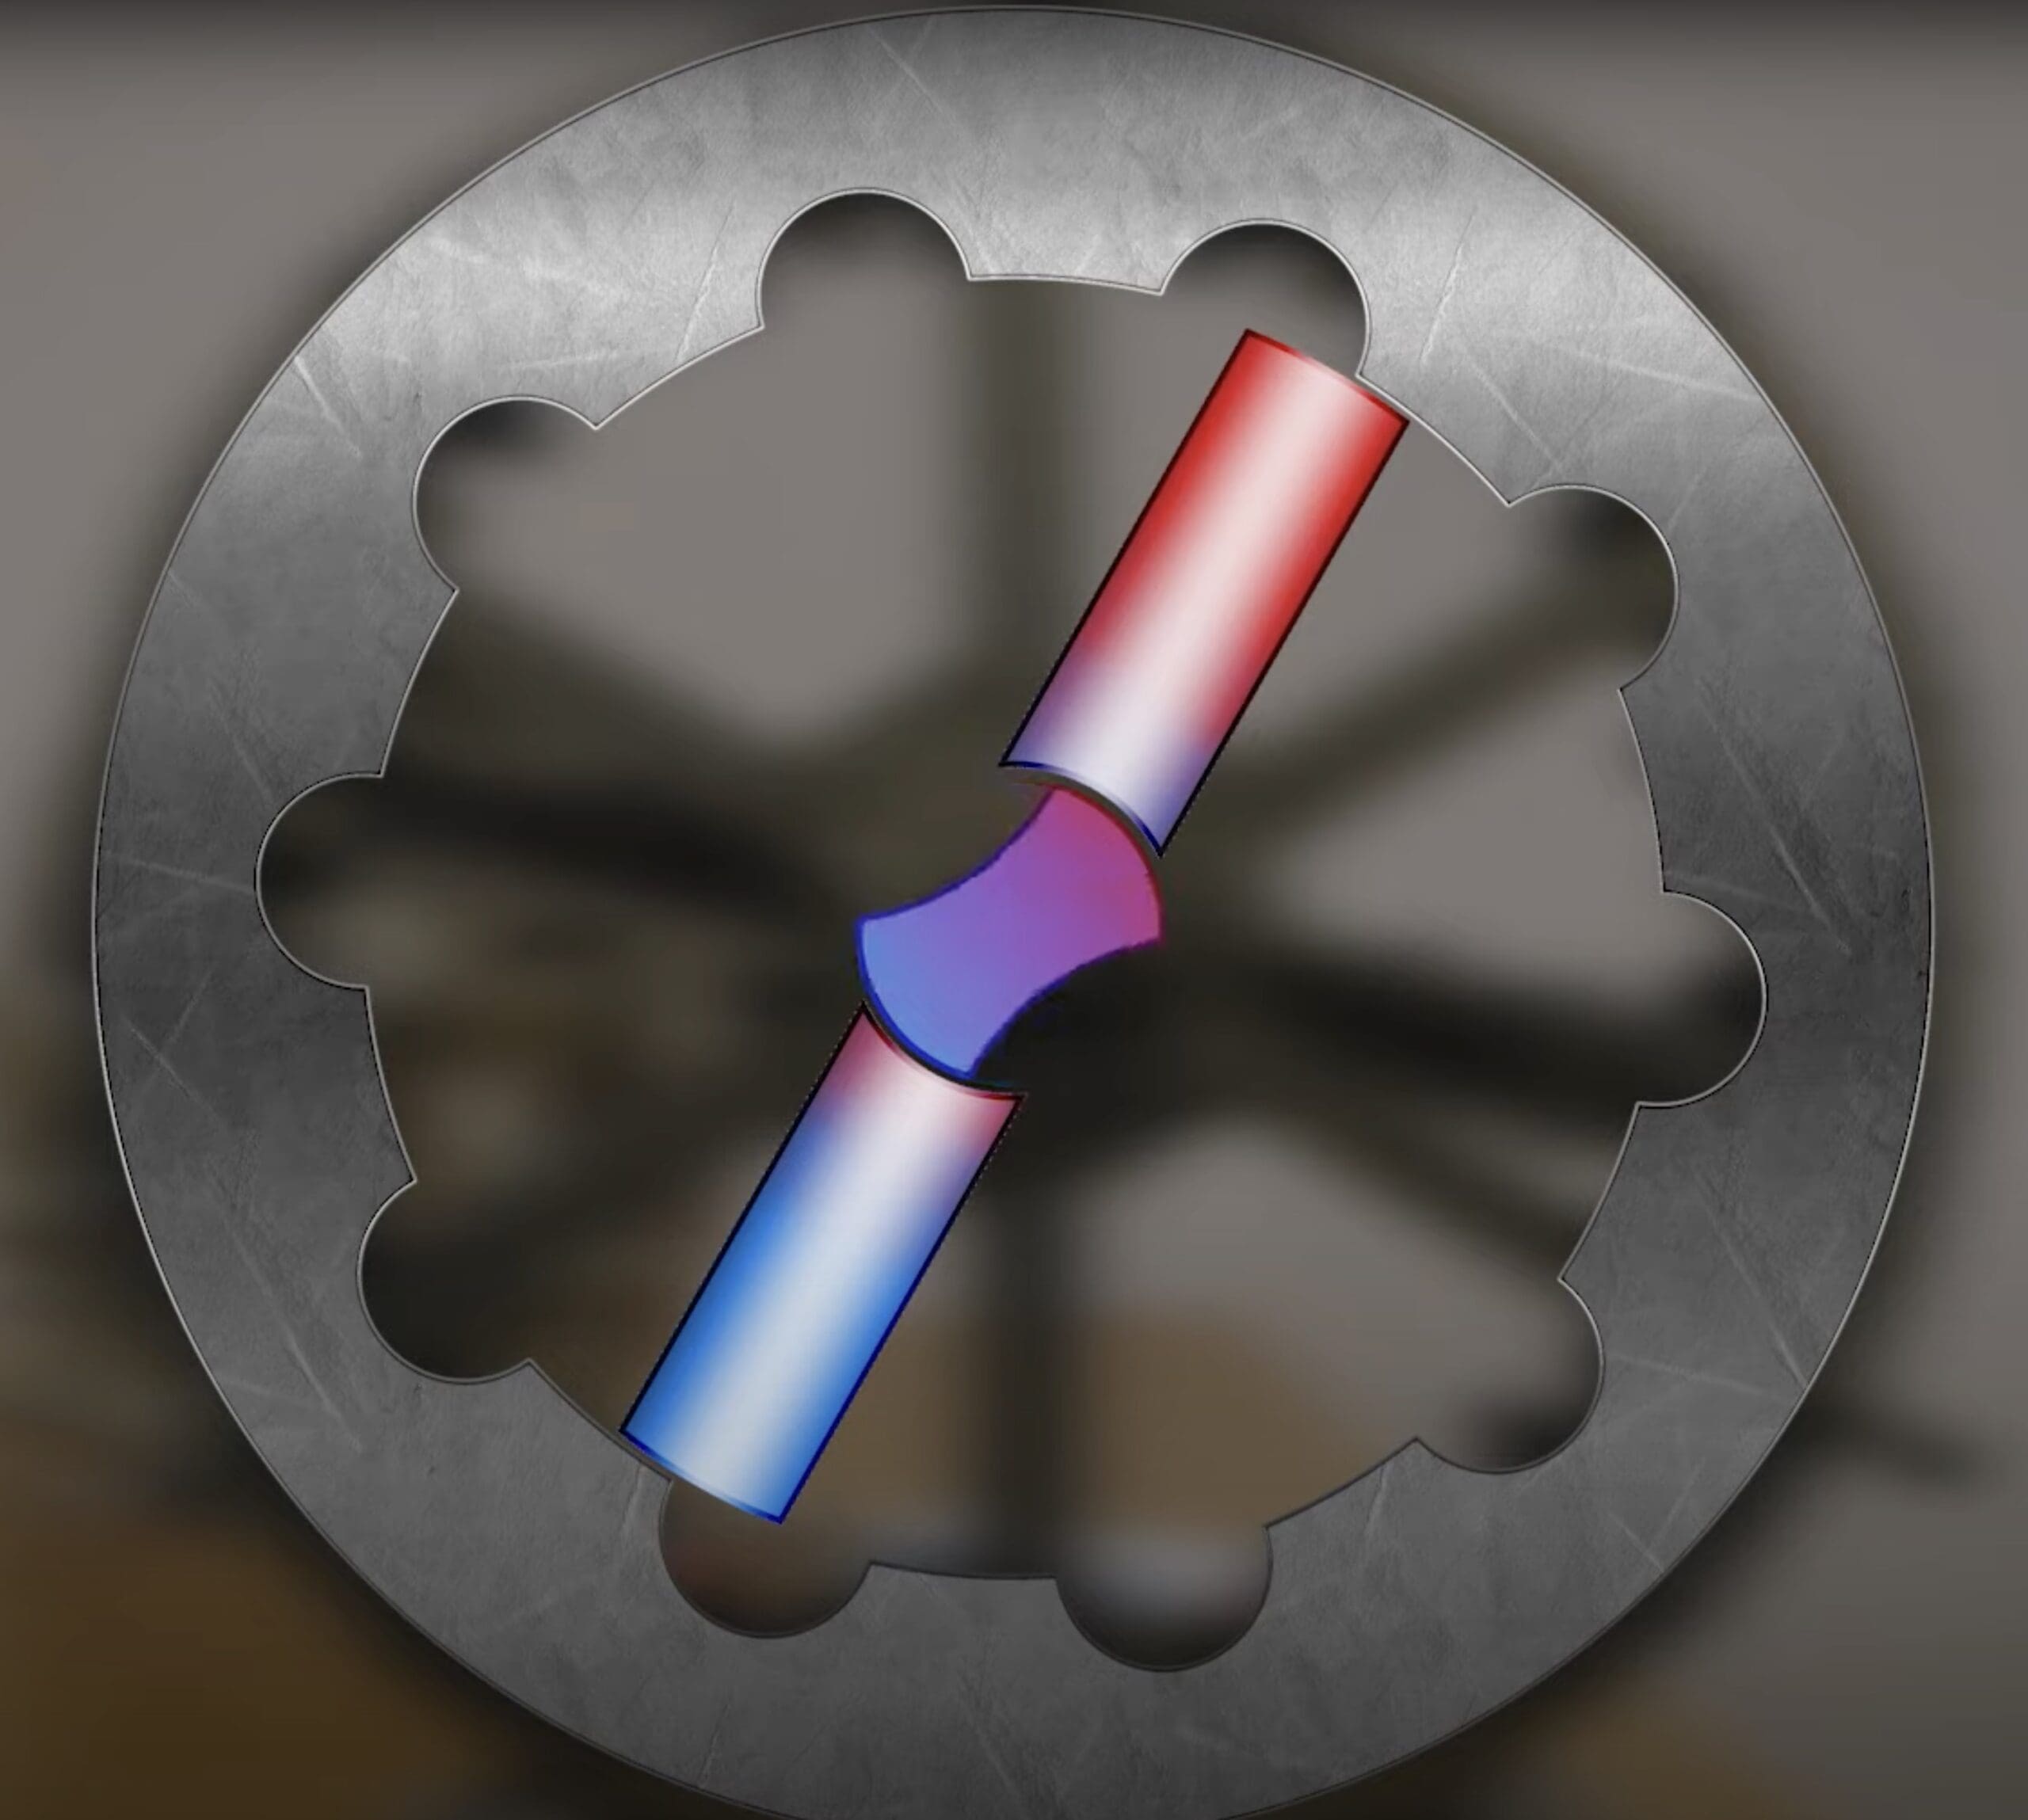 The Motoflux Principle, a patented three-component design used for a new magnet motor prototype. Media sourced from Motoflux.